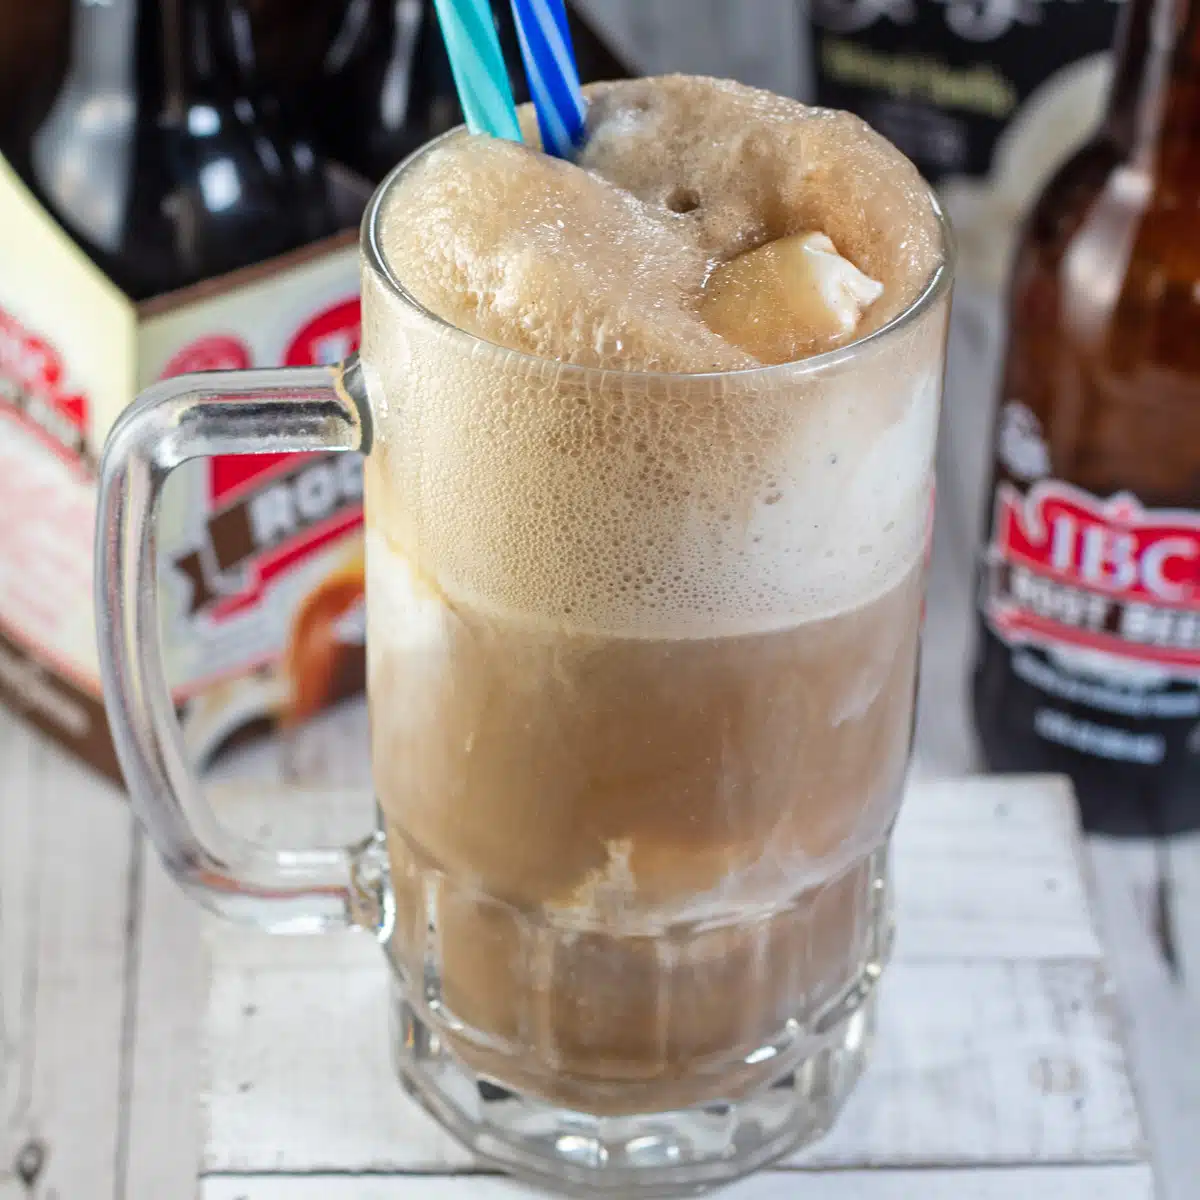 Square image of root beer float.